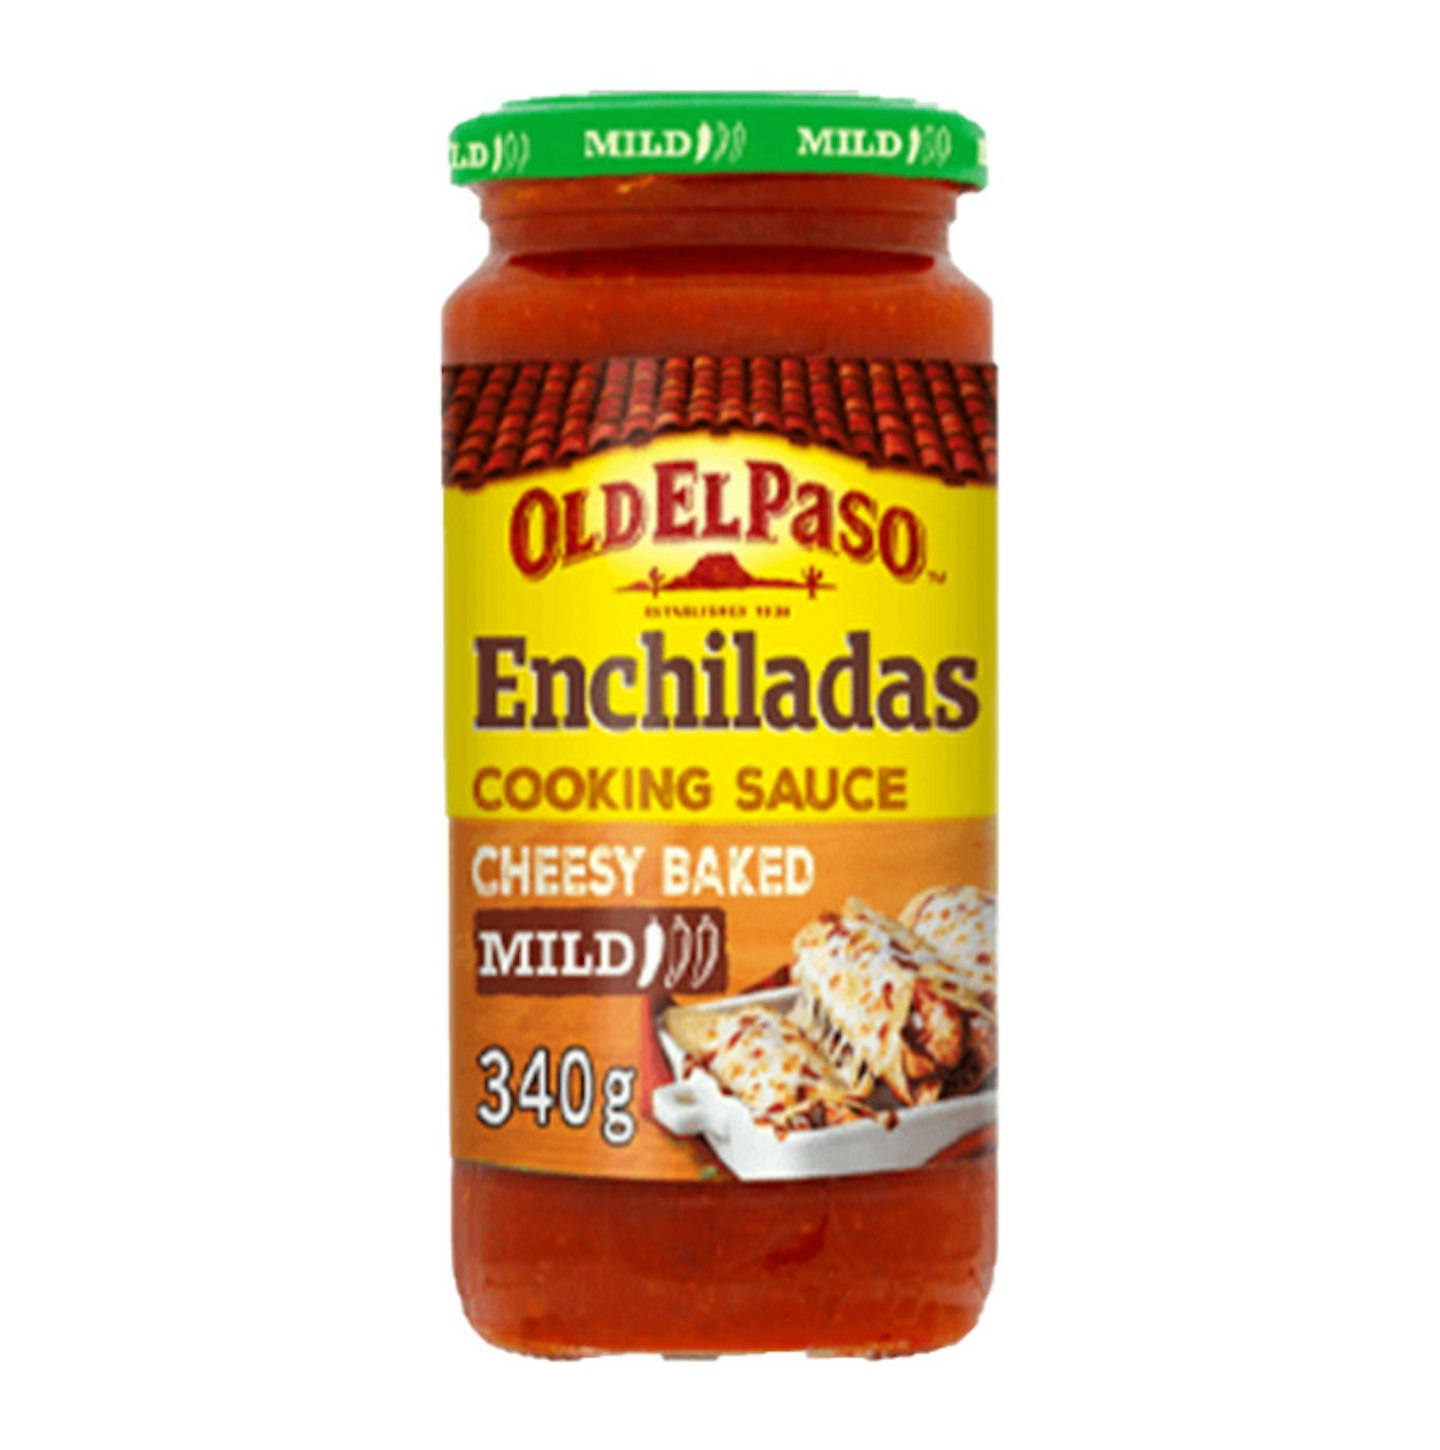 Old El Paso Mexican Cooking Sauce for Enchiladas Cheesy Baked